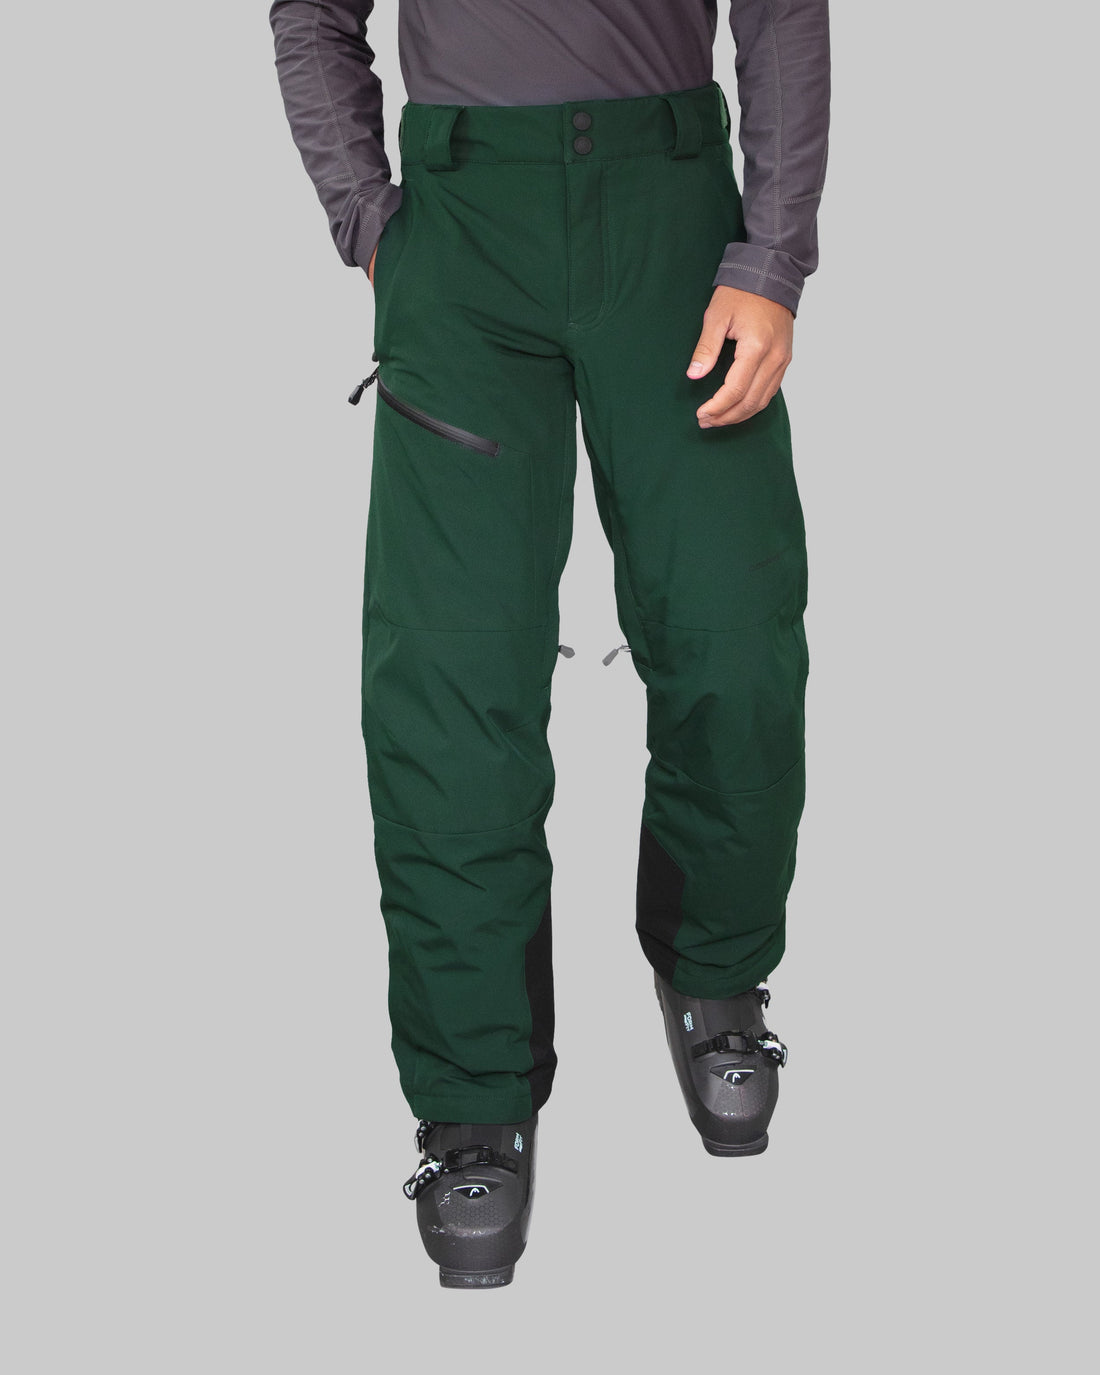 Unlock Wilderness' choice in the Obermeyer Vs North Face comparison, the Force Pant by Obermeyer